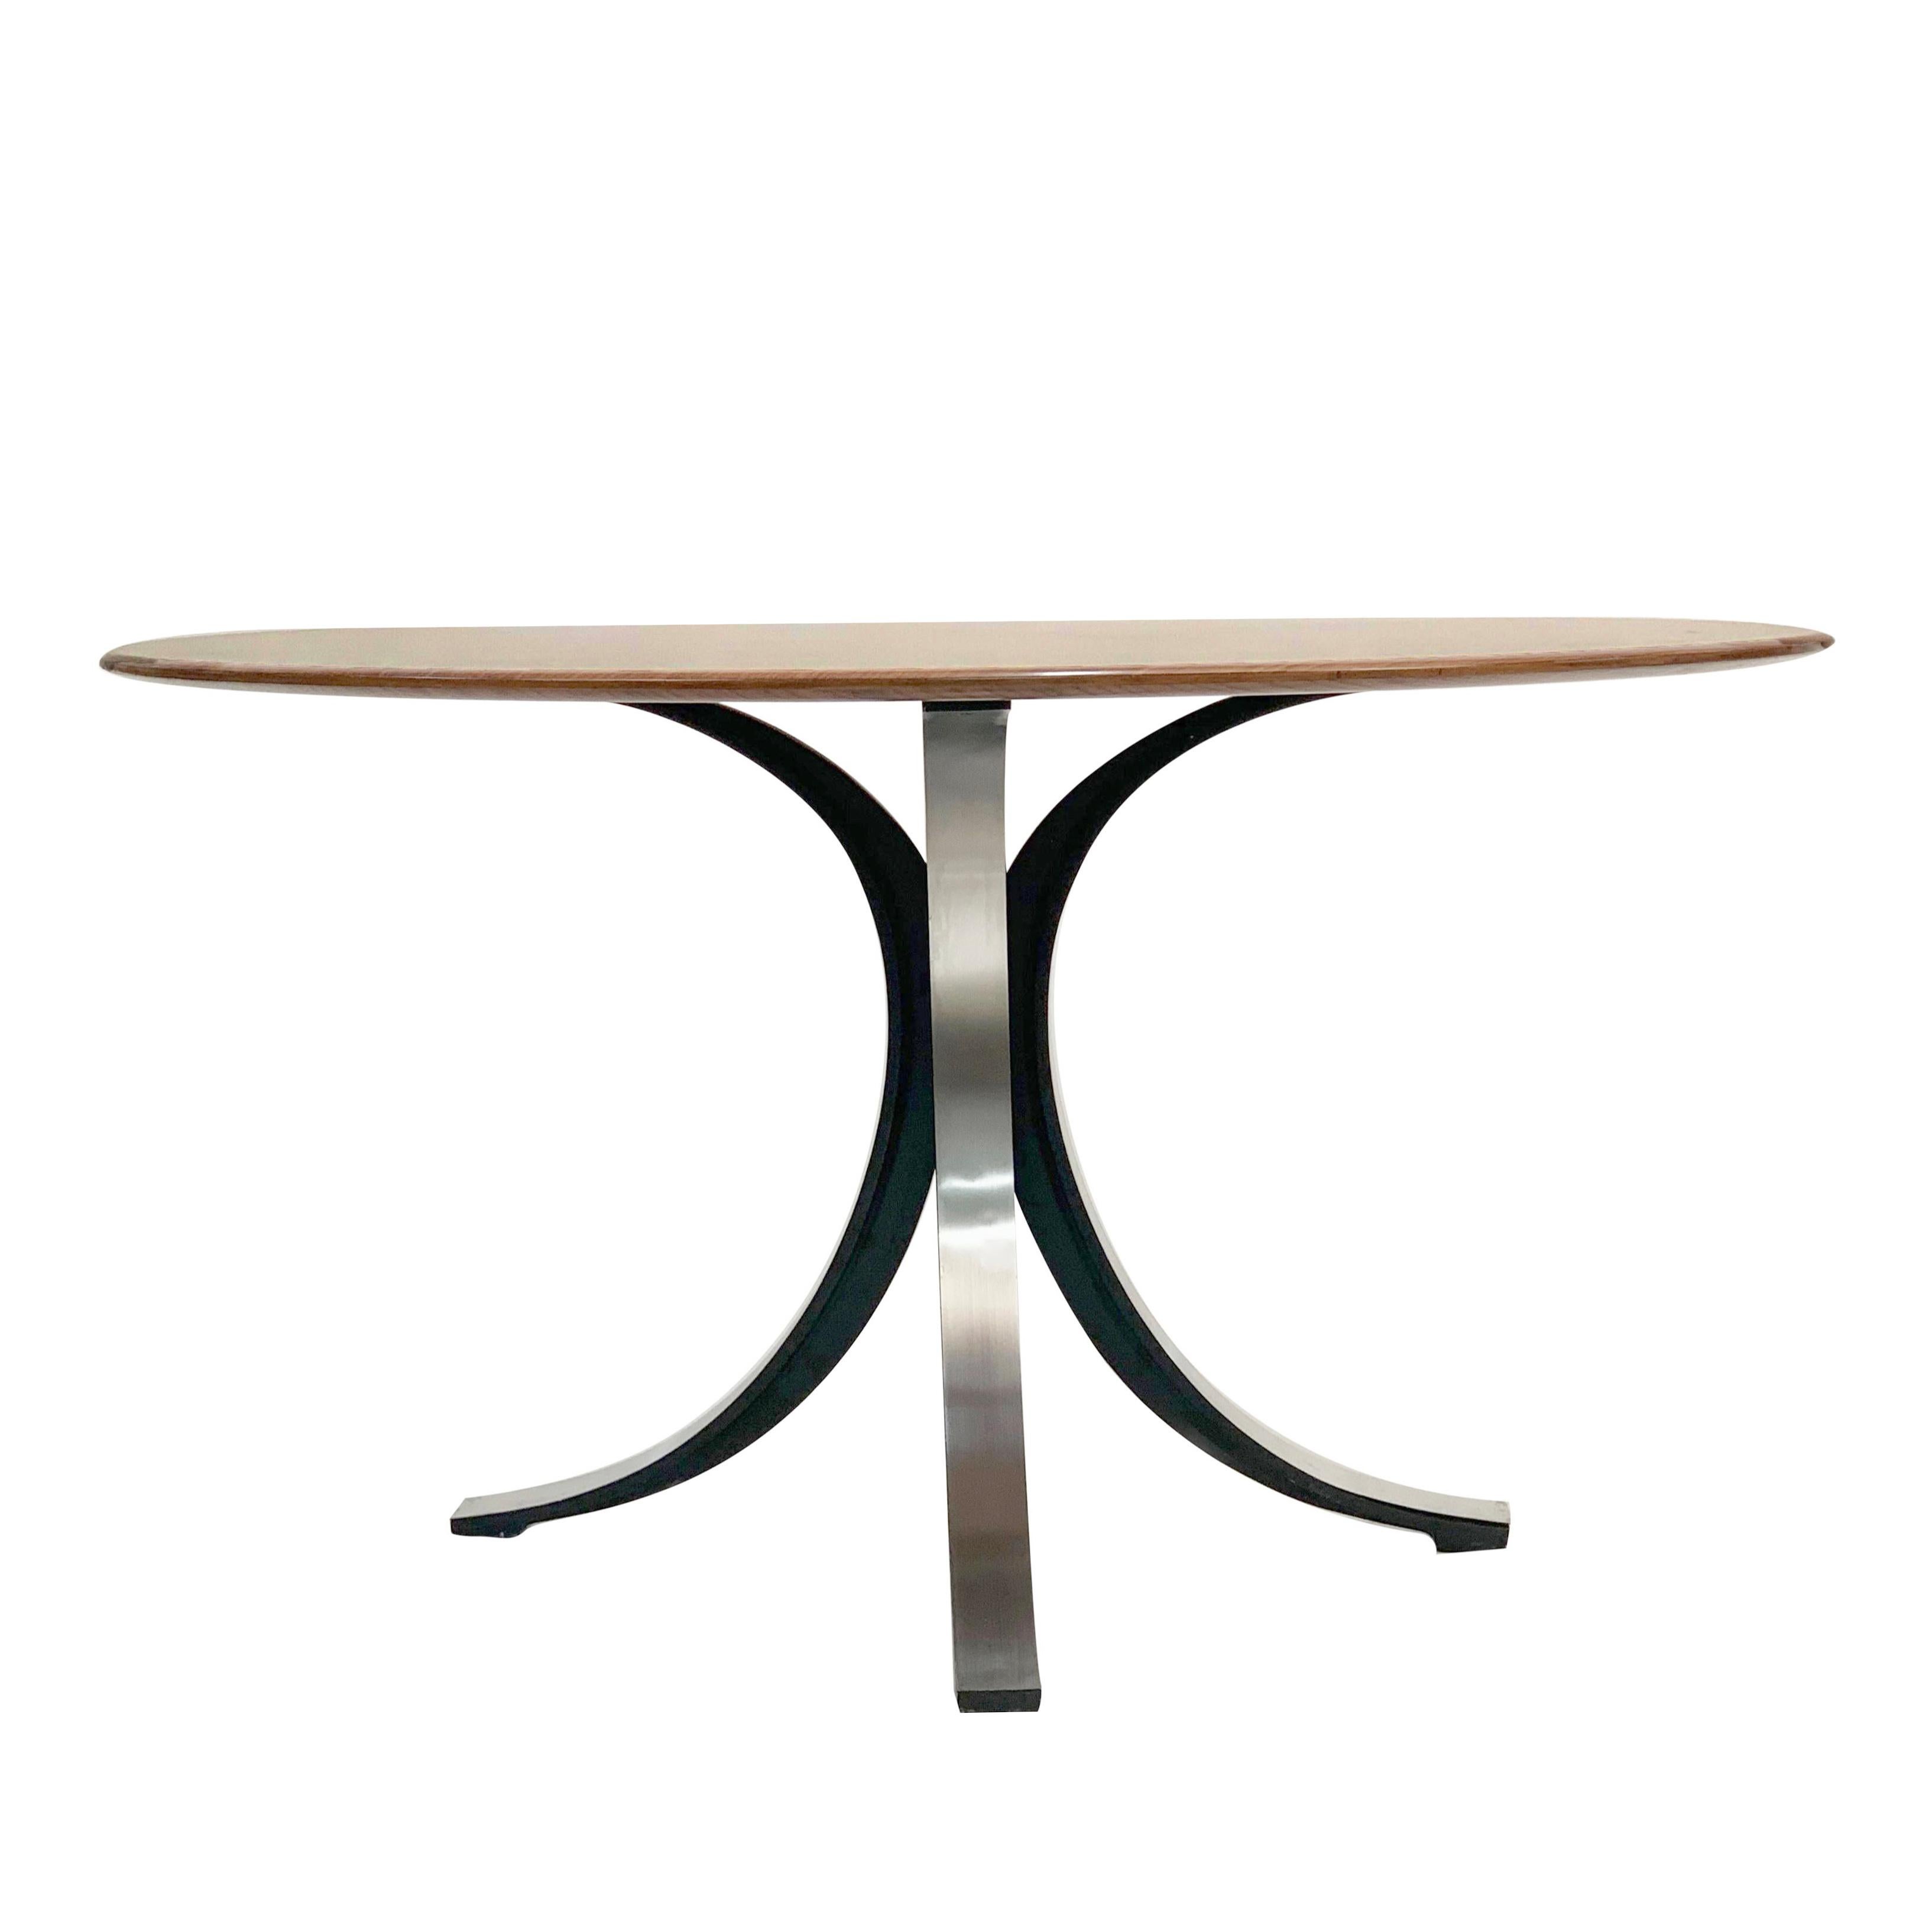 Astonishing midcentury wood and steel T-69 round dining table. This marvelous piece was designed by Eugenio Gerli and Osvaldo Borsani in Italy in 1965.

This dining table comes with the original label (this feature of this table is under the